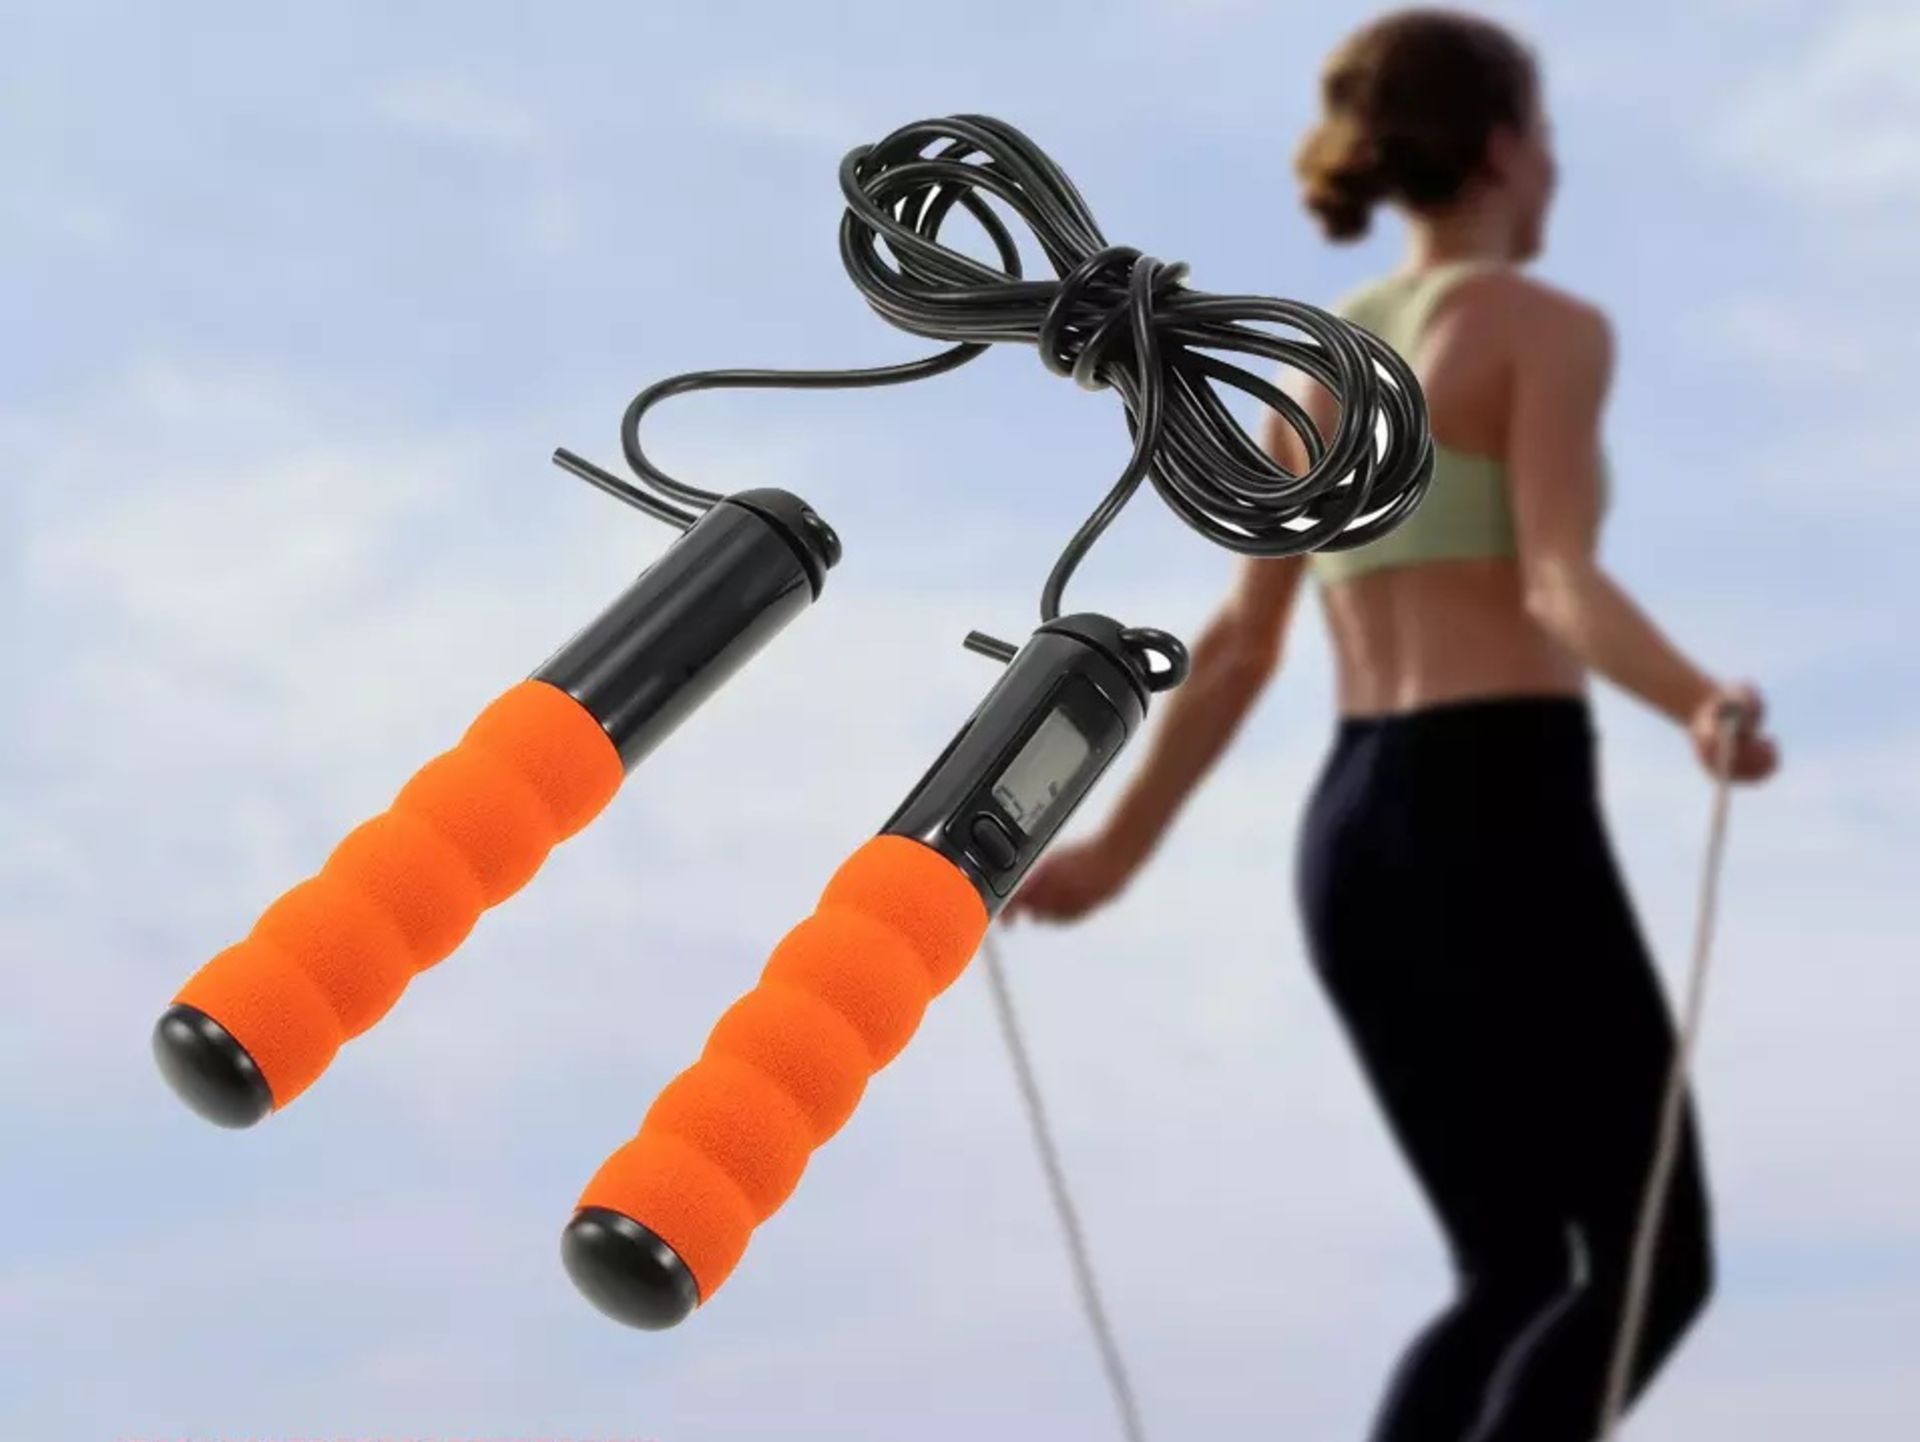 *TRADE QTY* Brand New Bluetooth Smart Skipping Rope With LED Display & App Compatibility - Tracks